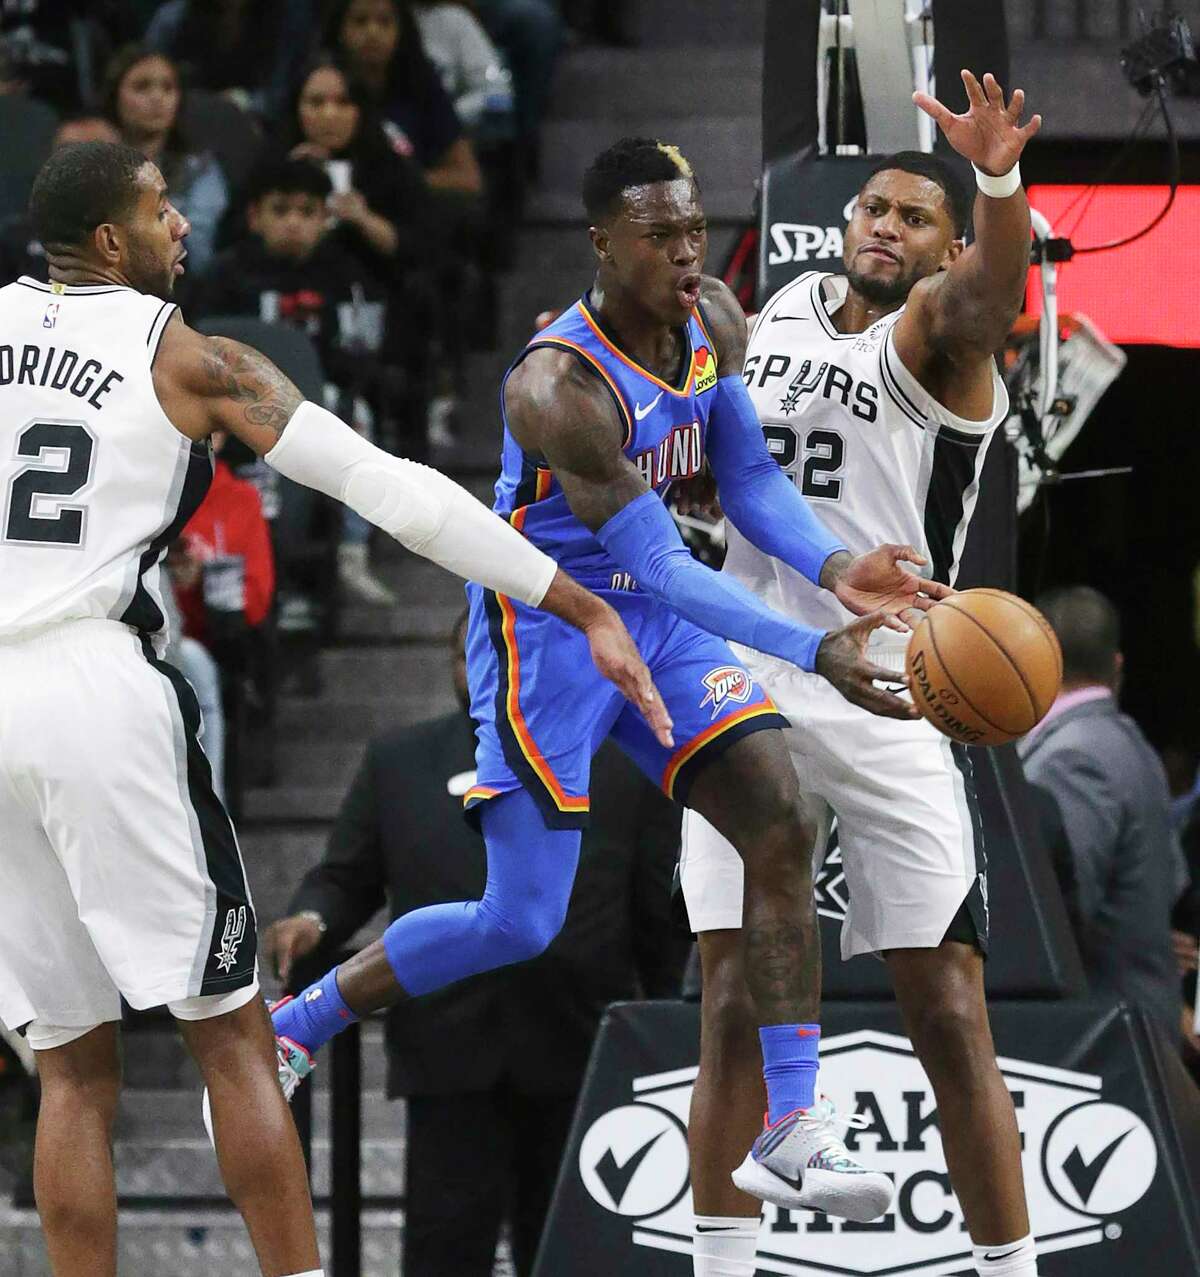 Dennis Schroder passes the ball out from under LaMarcus Aldridge and Rudy Gay as the Spurs hosts the Thunder at the AT&T Center on Nov. 7, 2019.